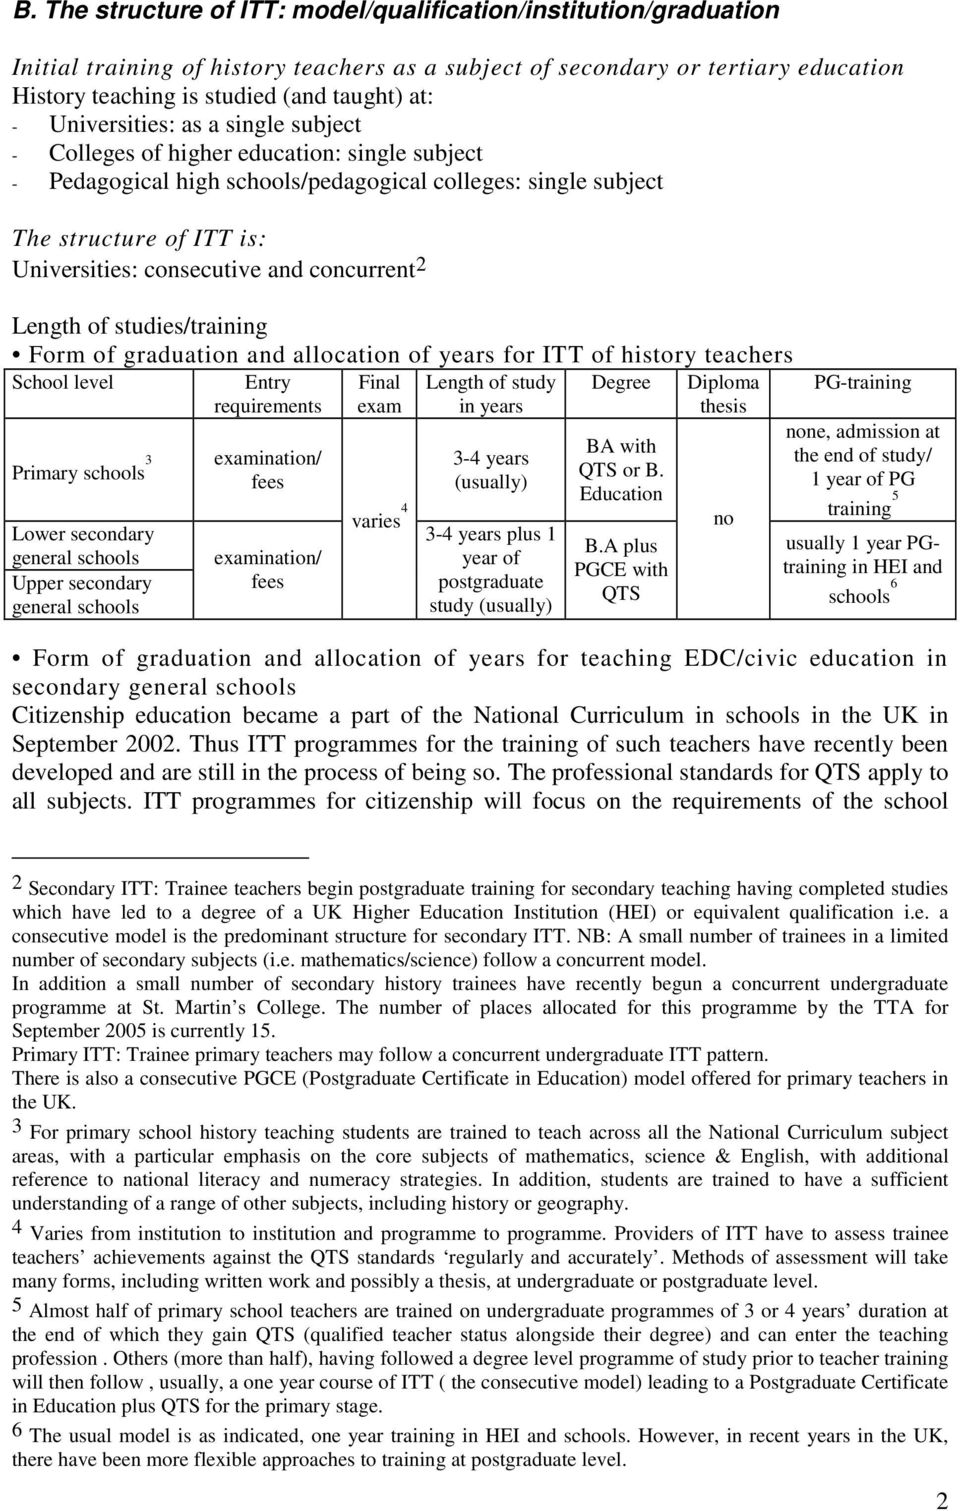 concurrent 2 Length of studies/training Form of graduation and allocation of years for ITT of history teachers School level Primary schools 3 Lower secondary general schools Upper secondary general